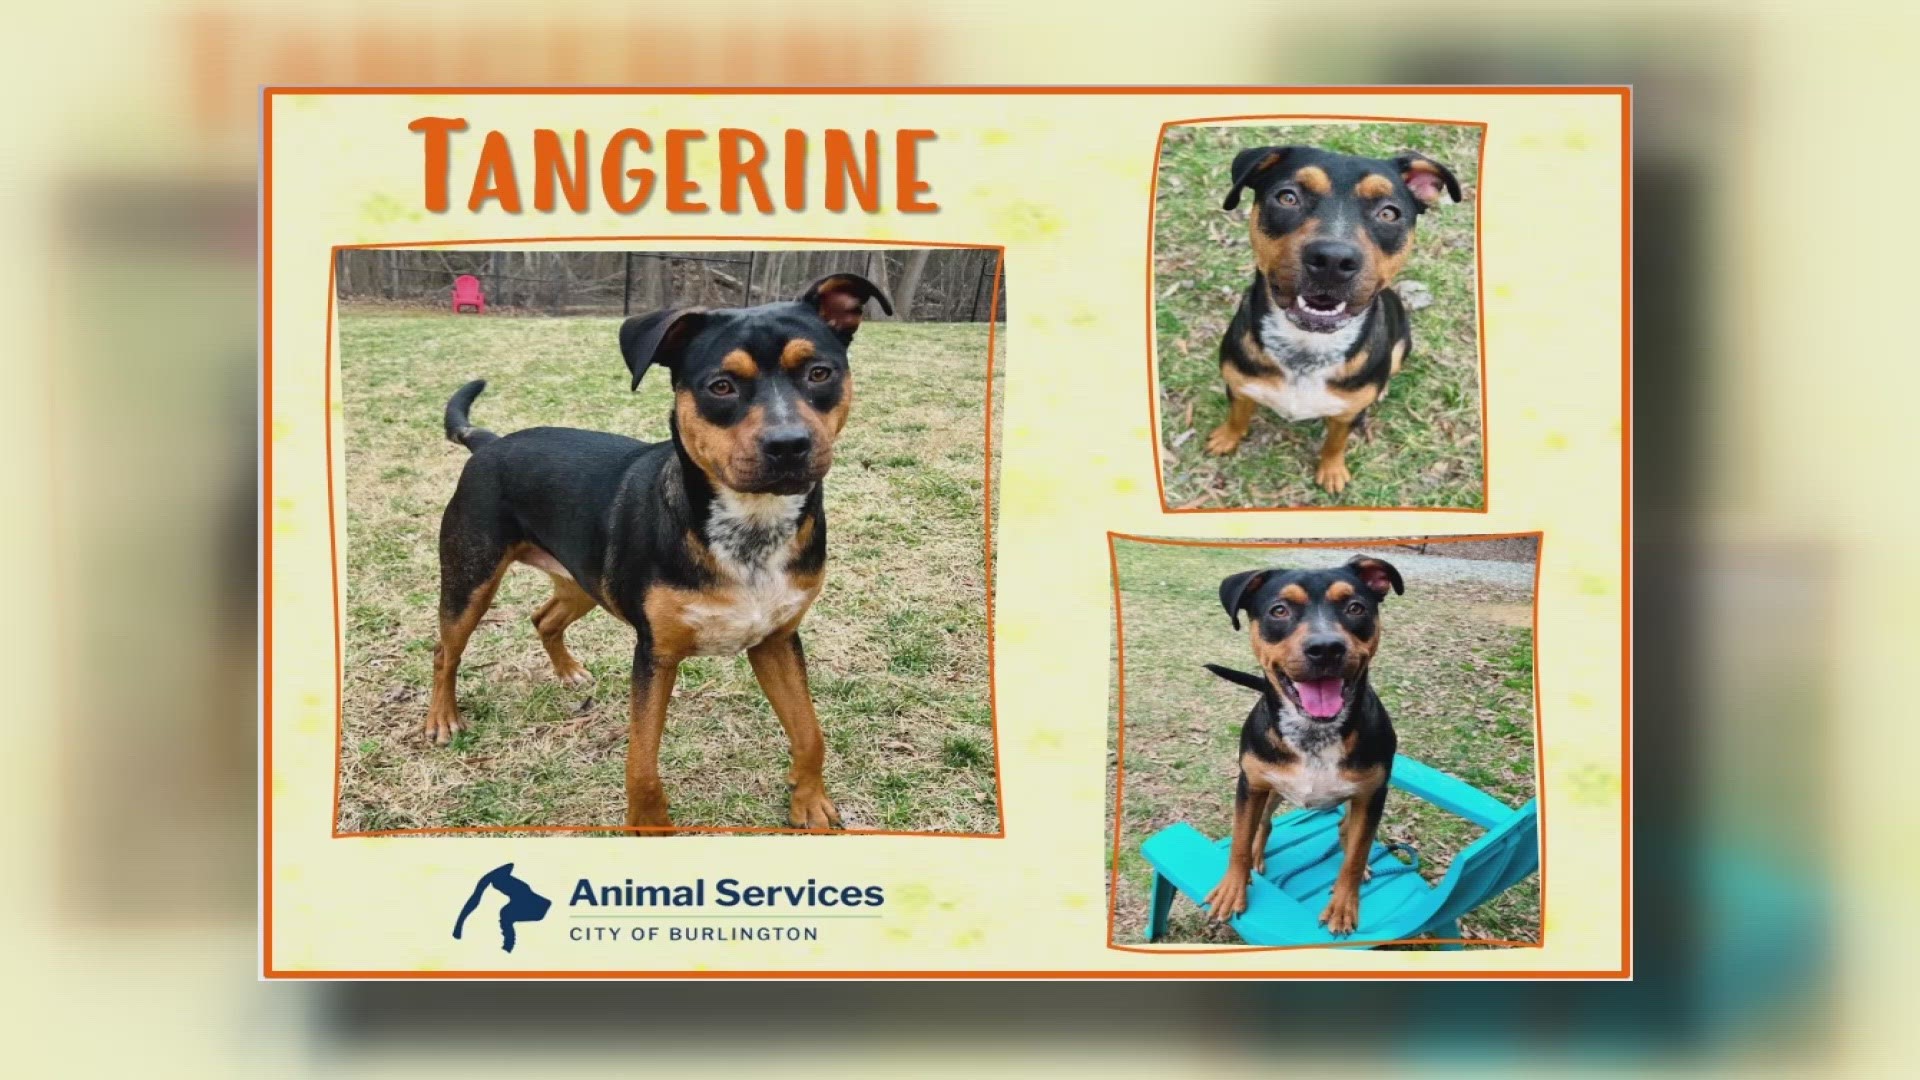 Let’s get Tangerine adopted!